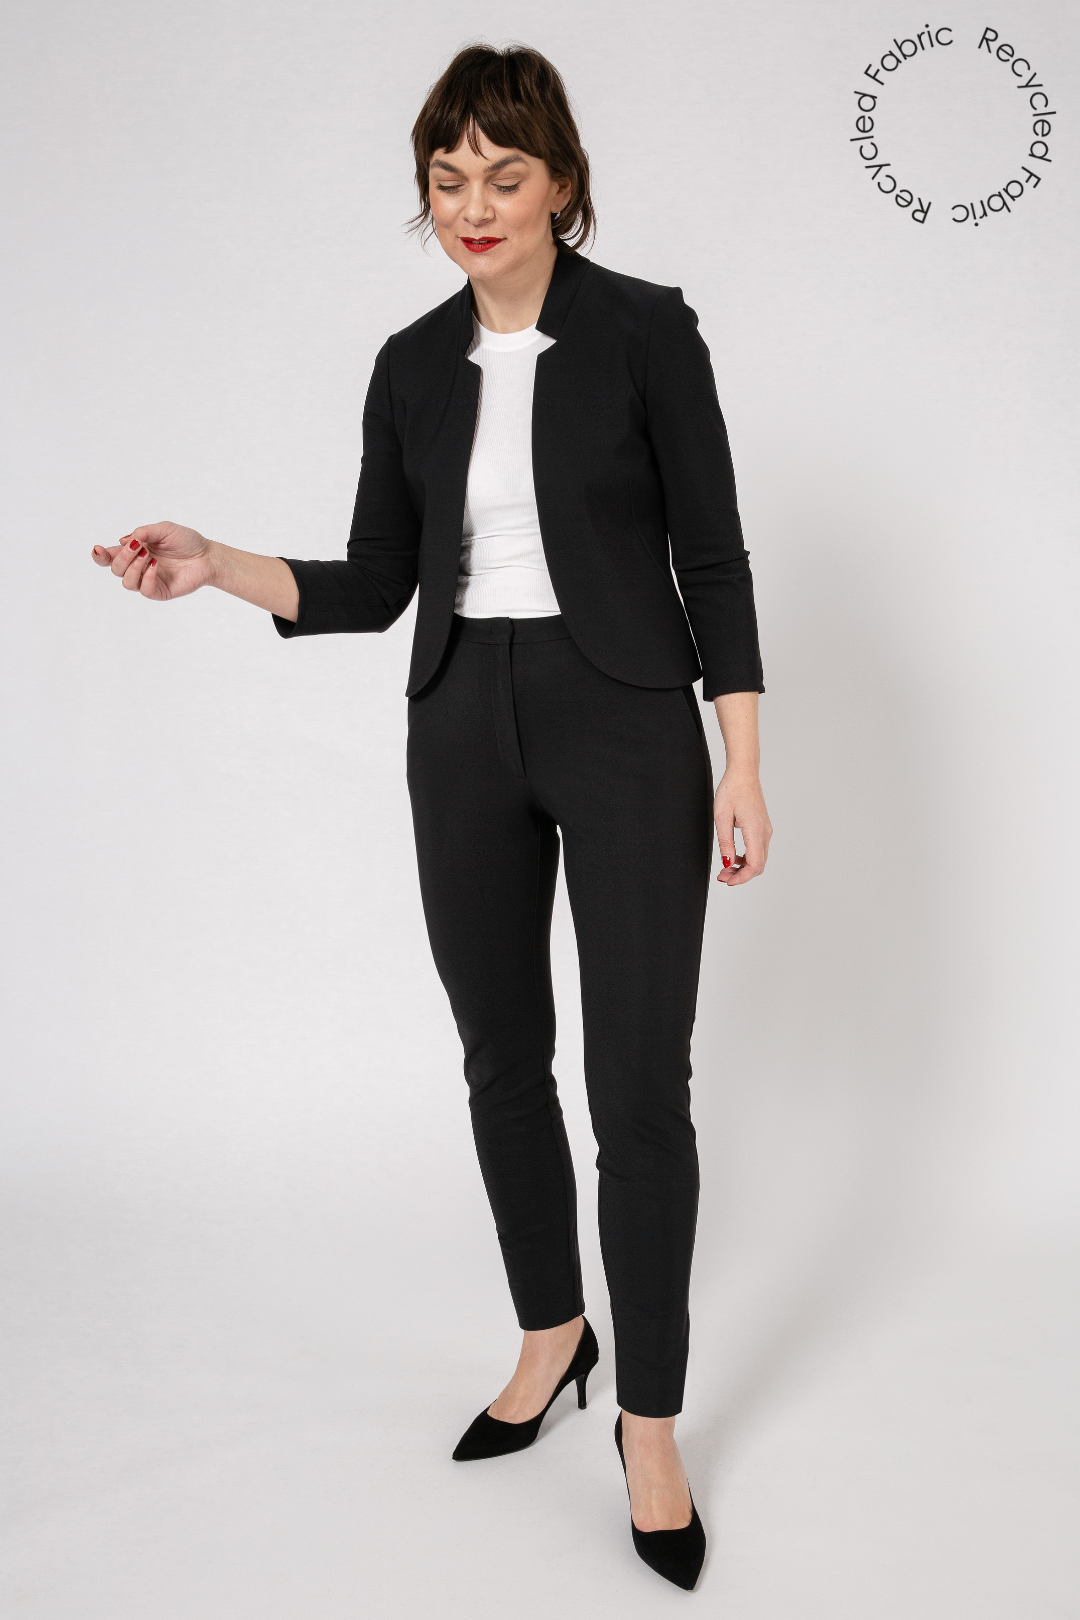 WORK TROUSERS LONG - CLASSIC TIGHT FIT